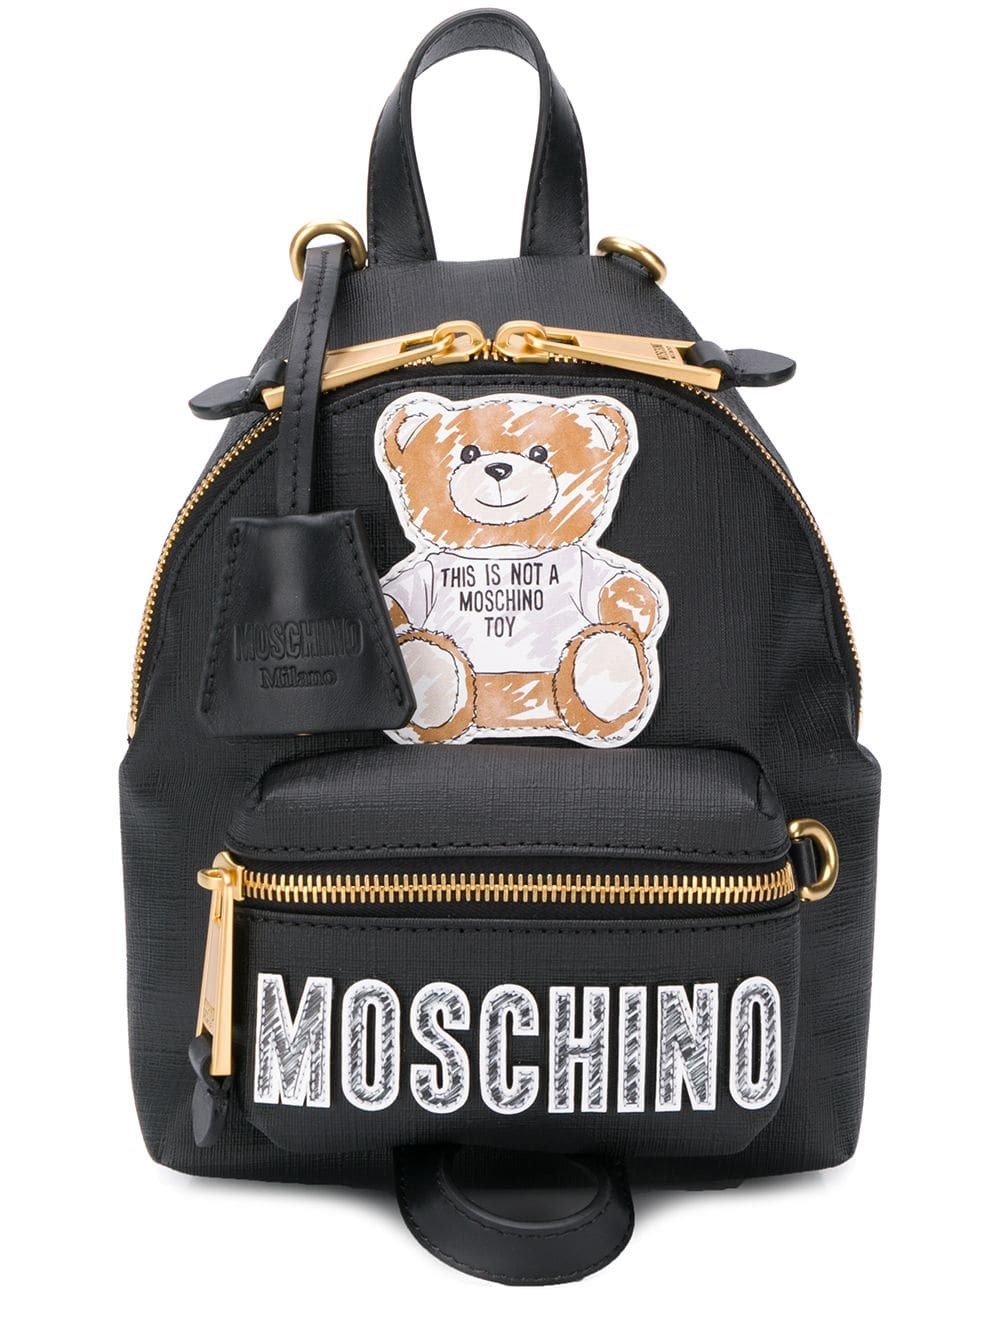 moschino TEDDY BEAR BACKPACK available on montiboutique.com - 28379